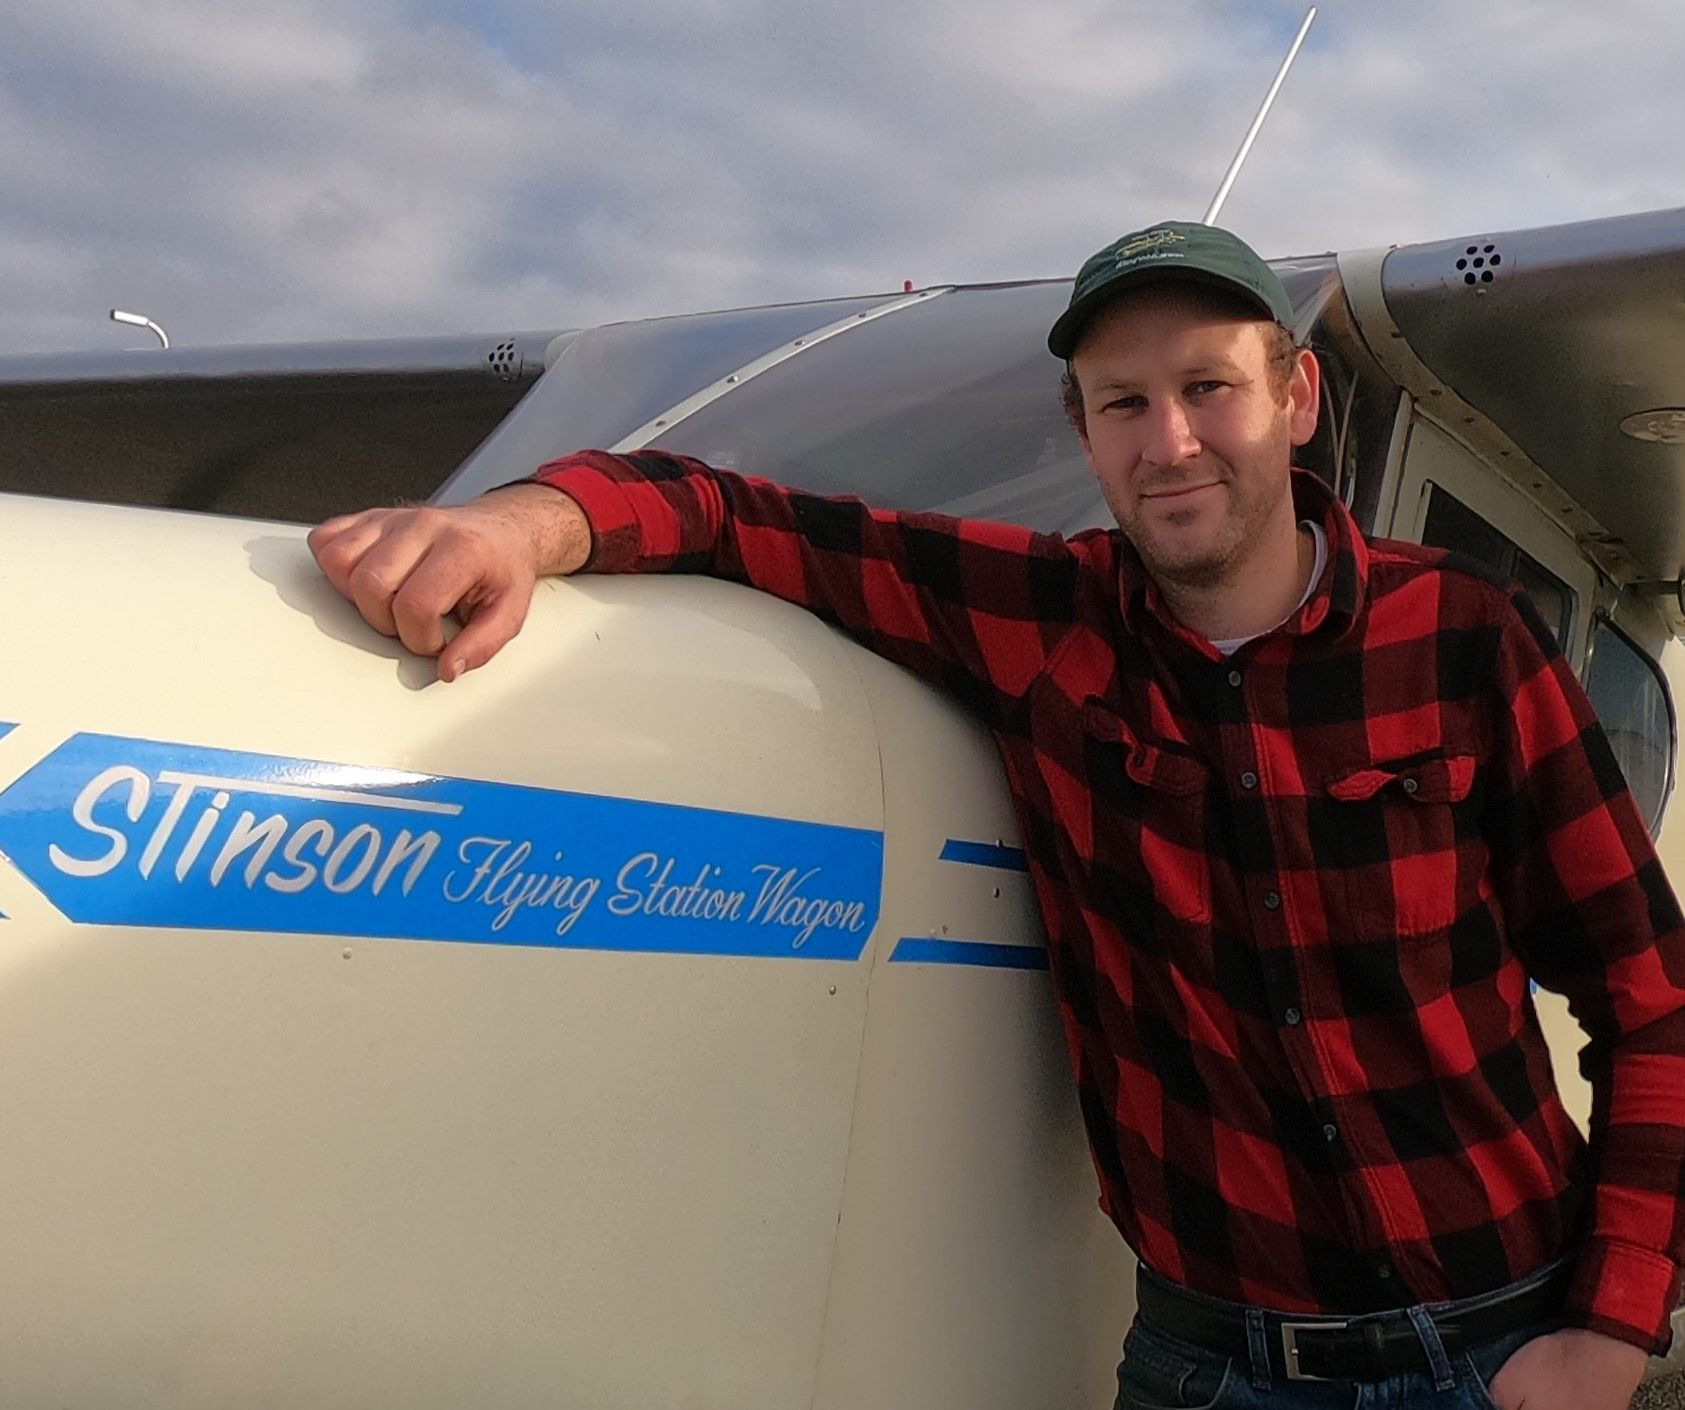 Mike with Stinson Airplane